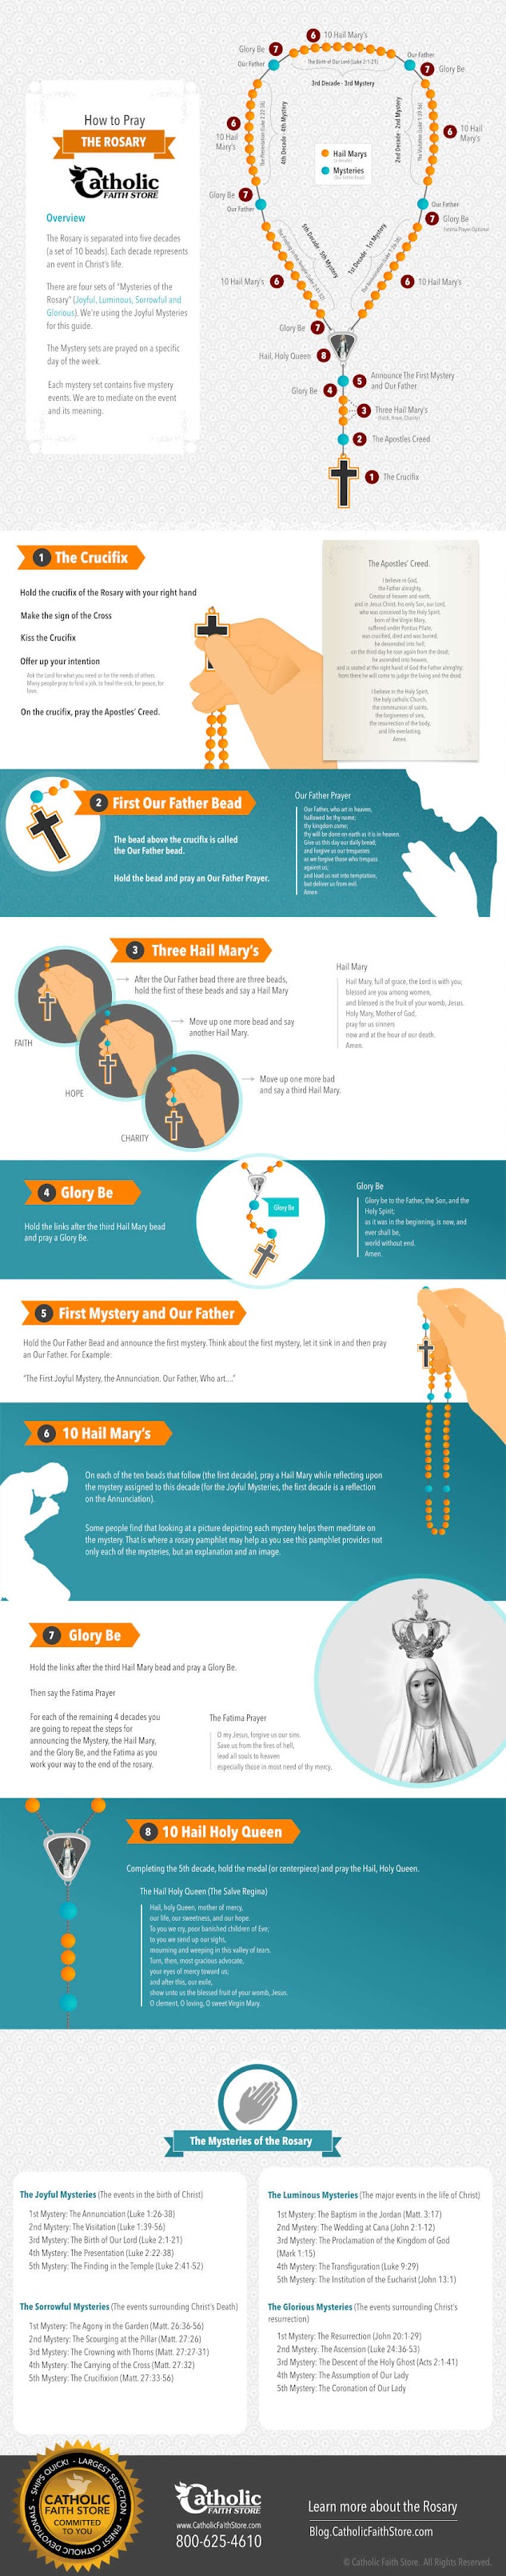 How to pray the rosary infographic